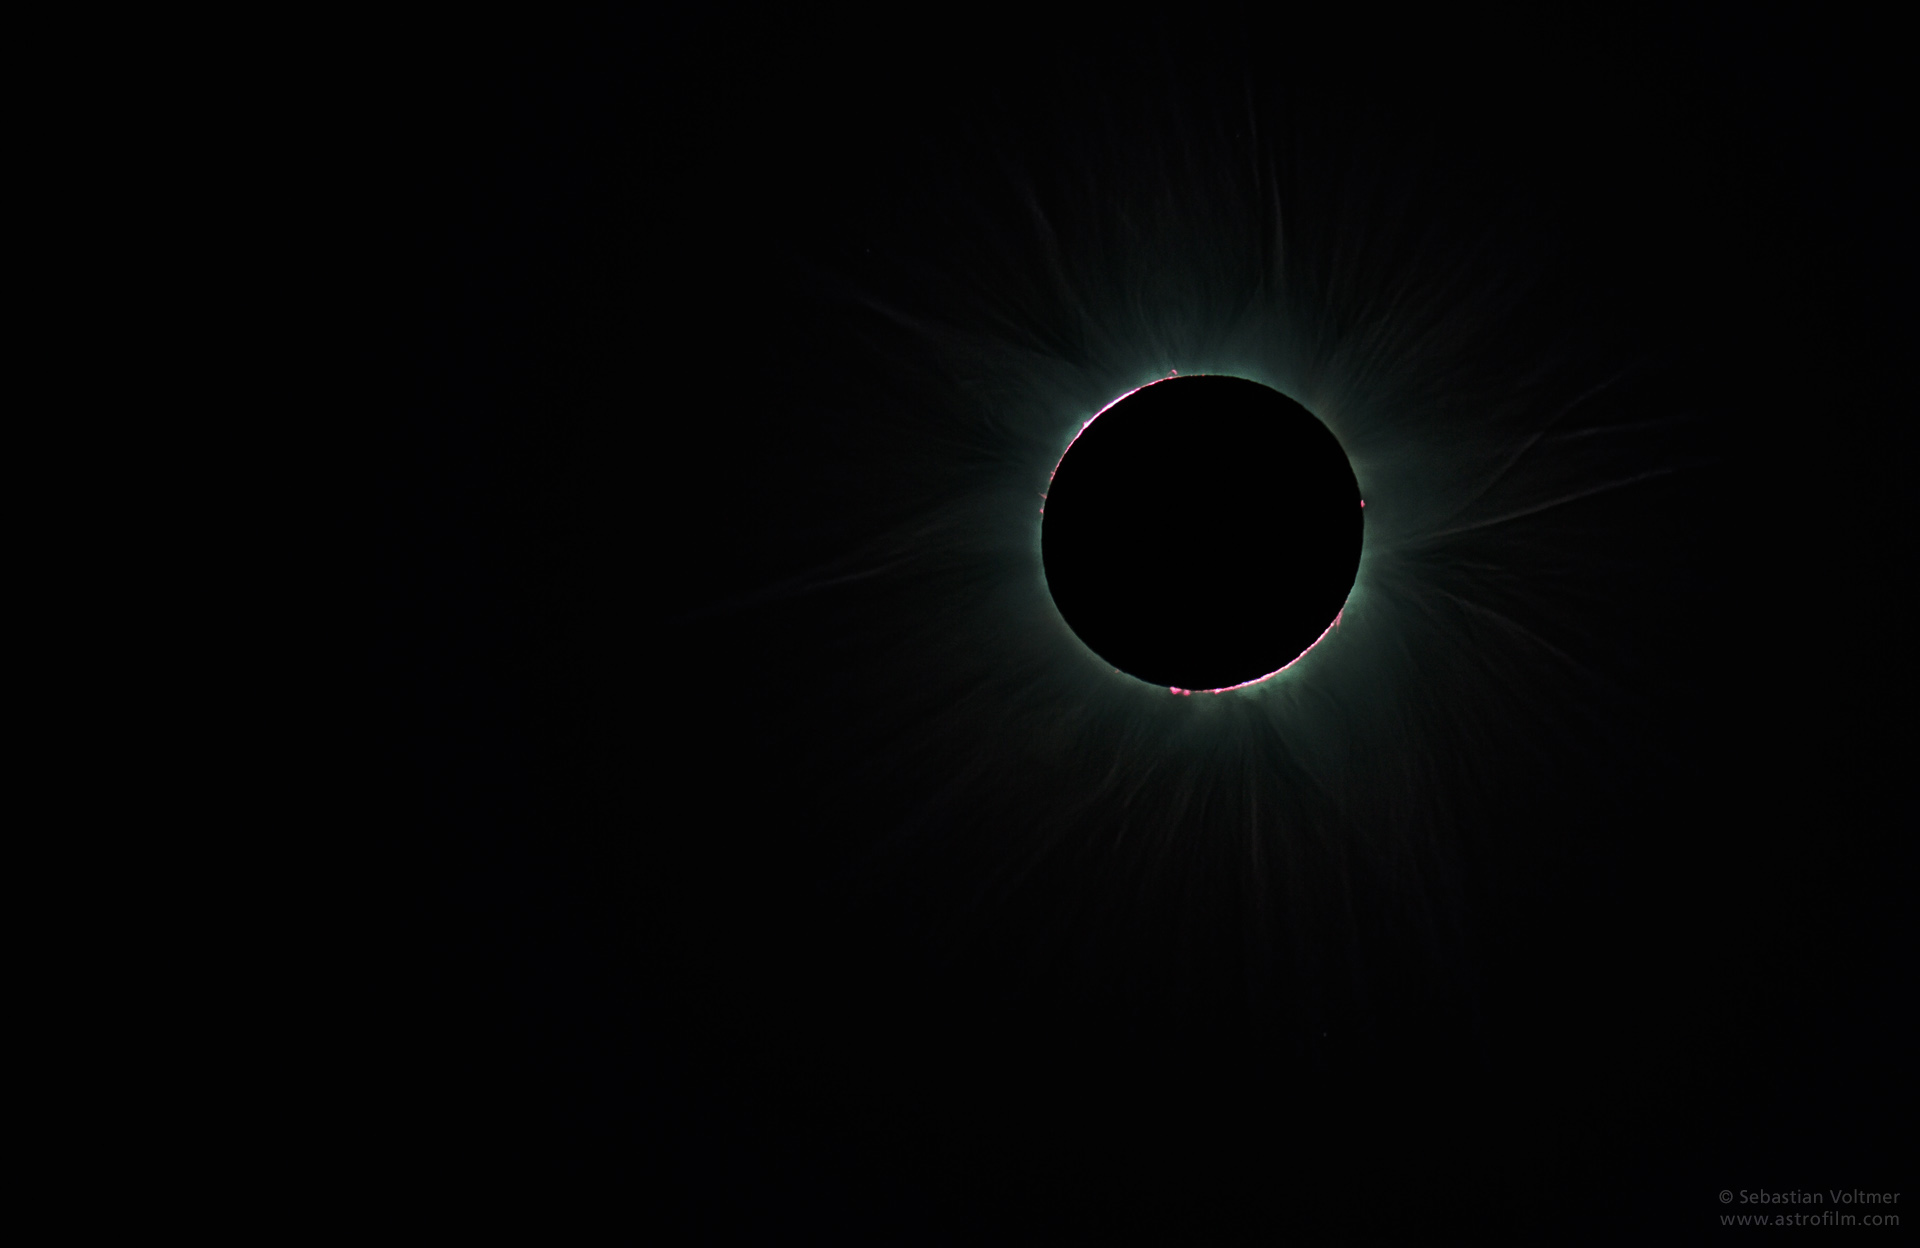 Solar Eclipse - Moment of Totality, 2012